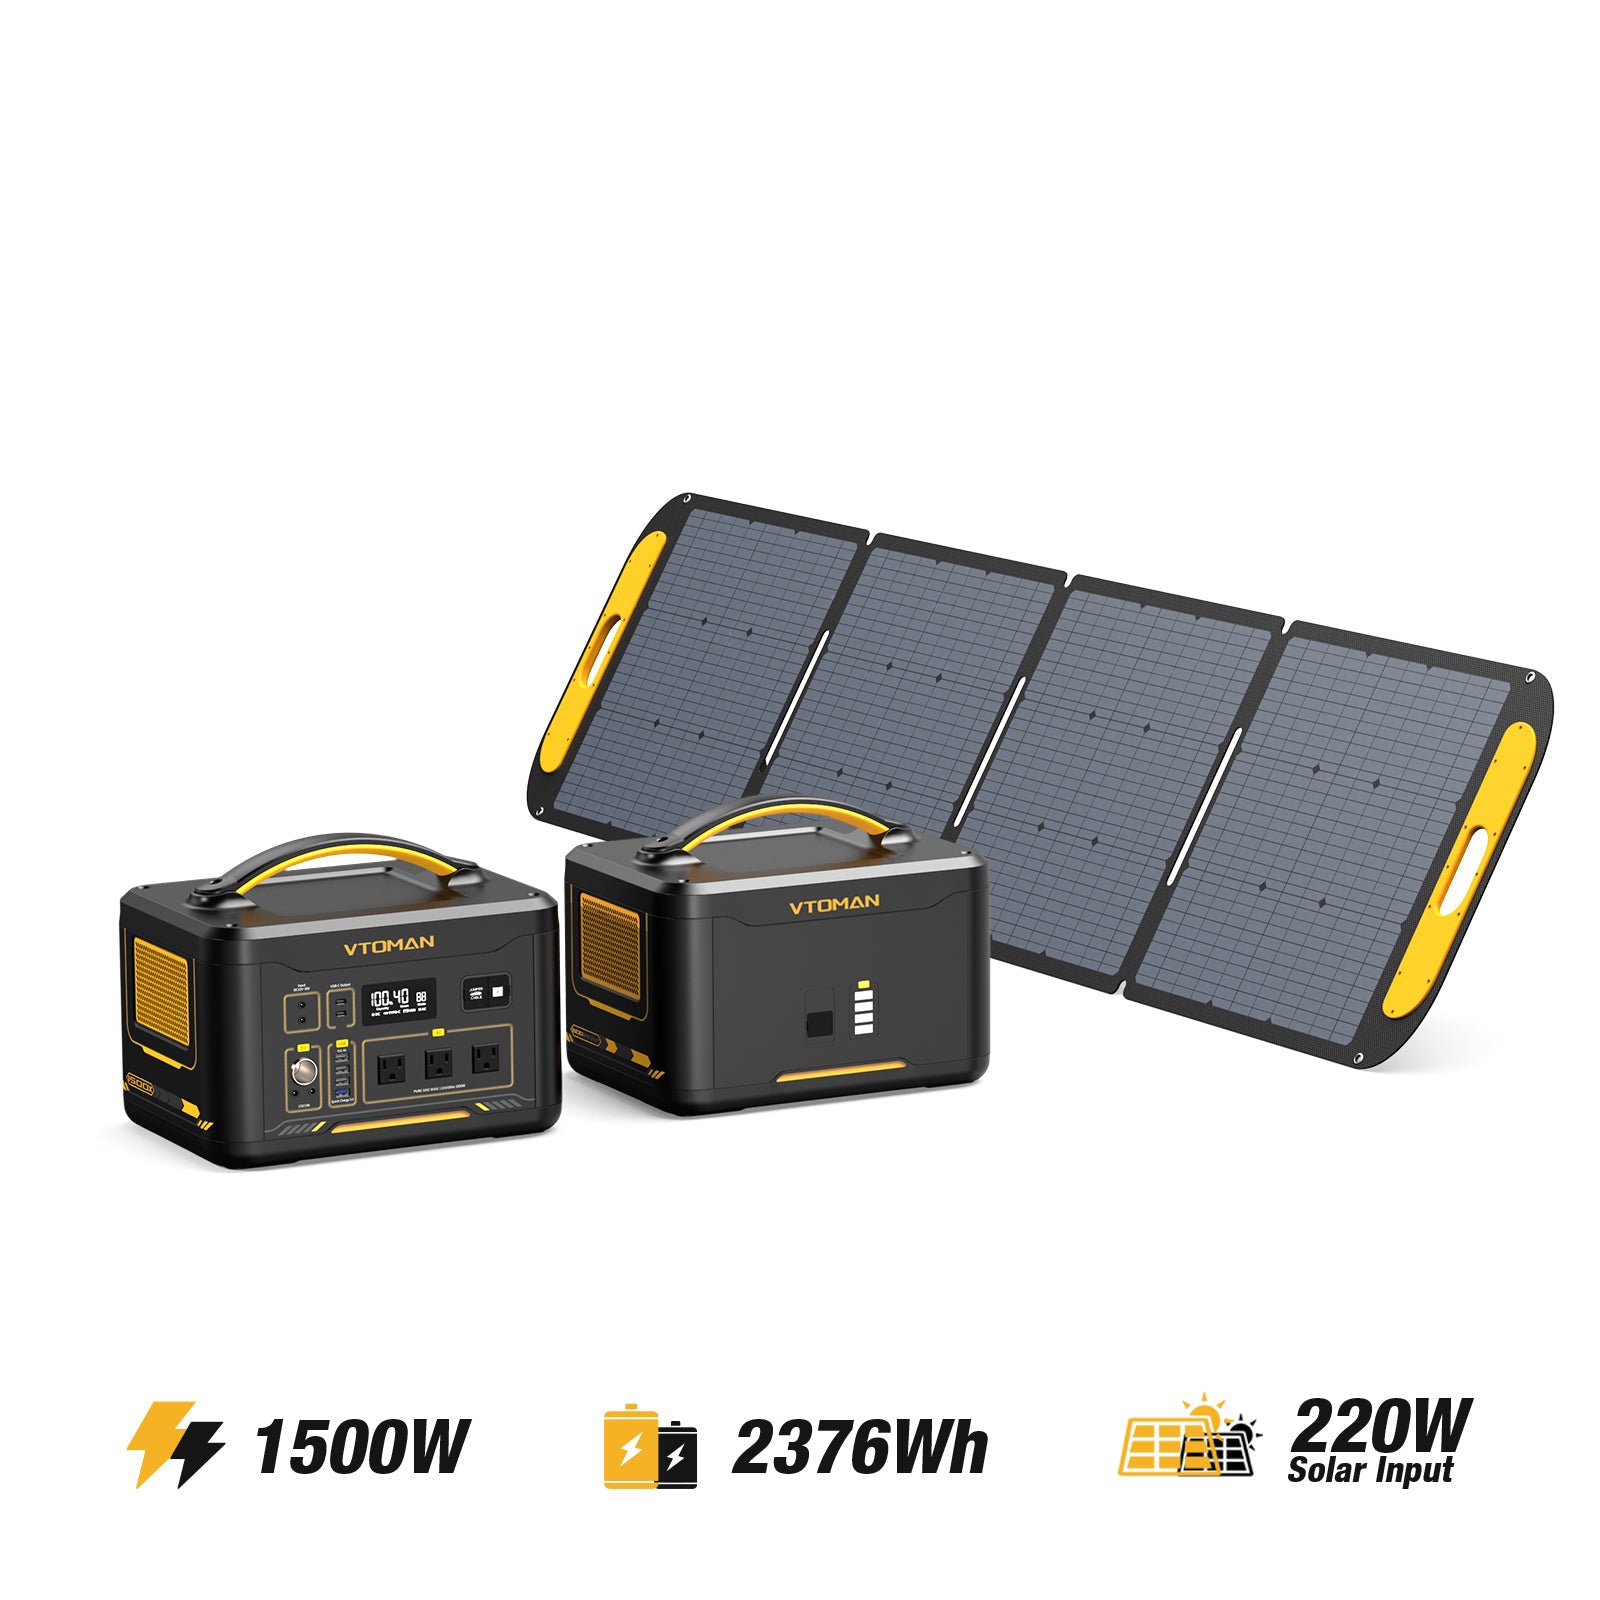 jump 1500x power station and 1548wh extra battery and 220w solar panel